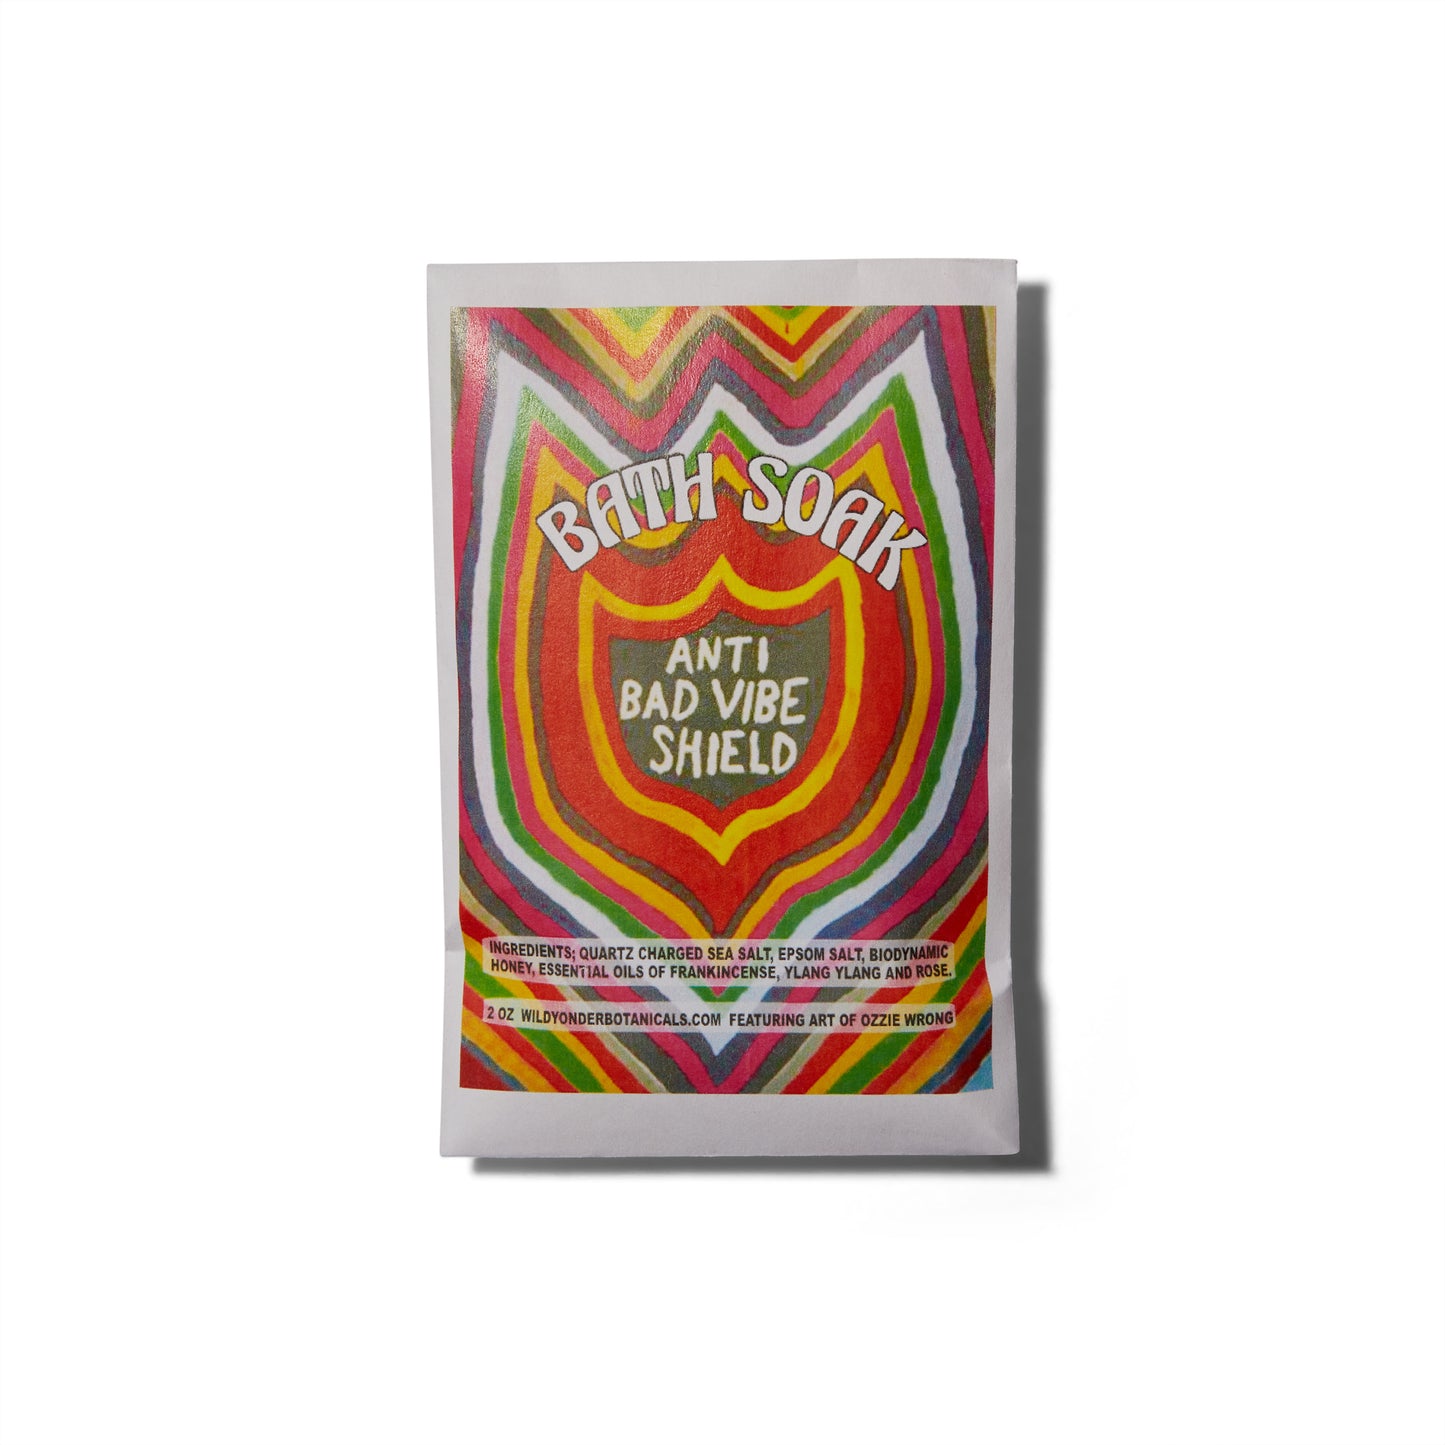 The Wild Yonder Organic Bath Salts in Anti Bad Vibe Shield. There is an illustration of a shield with rainbow stripes.